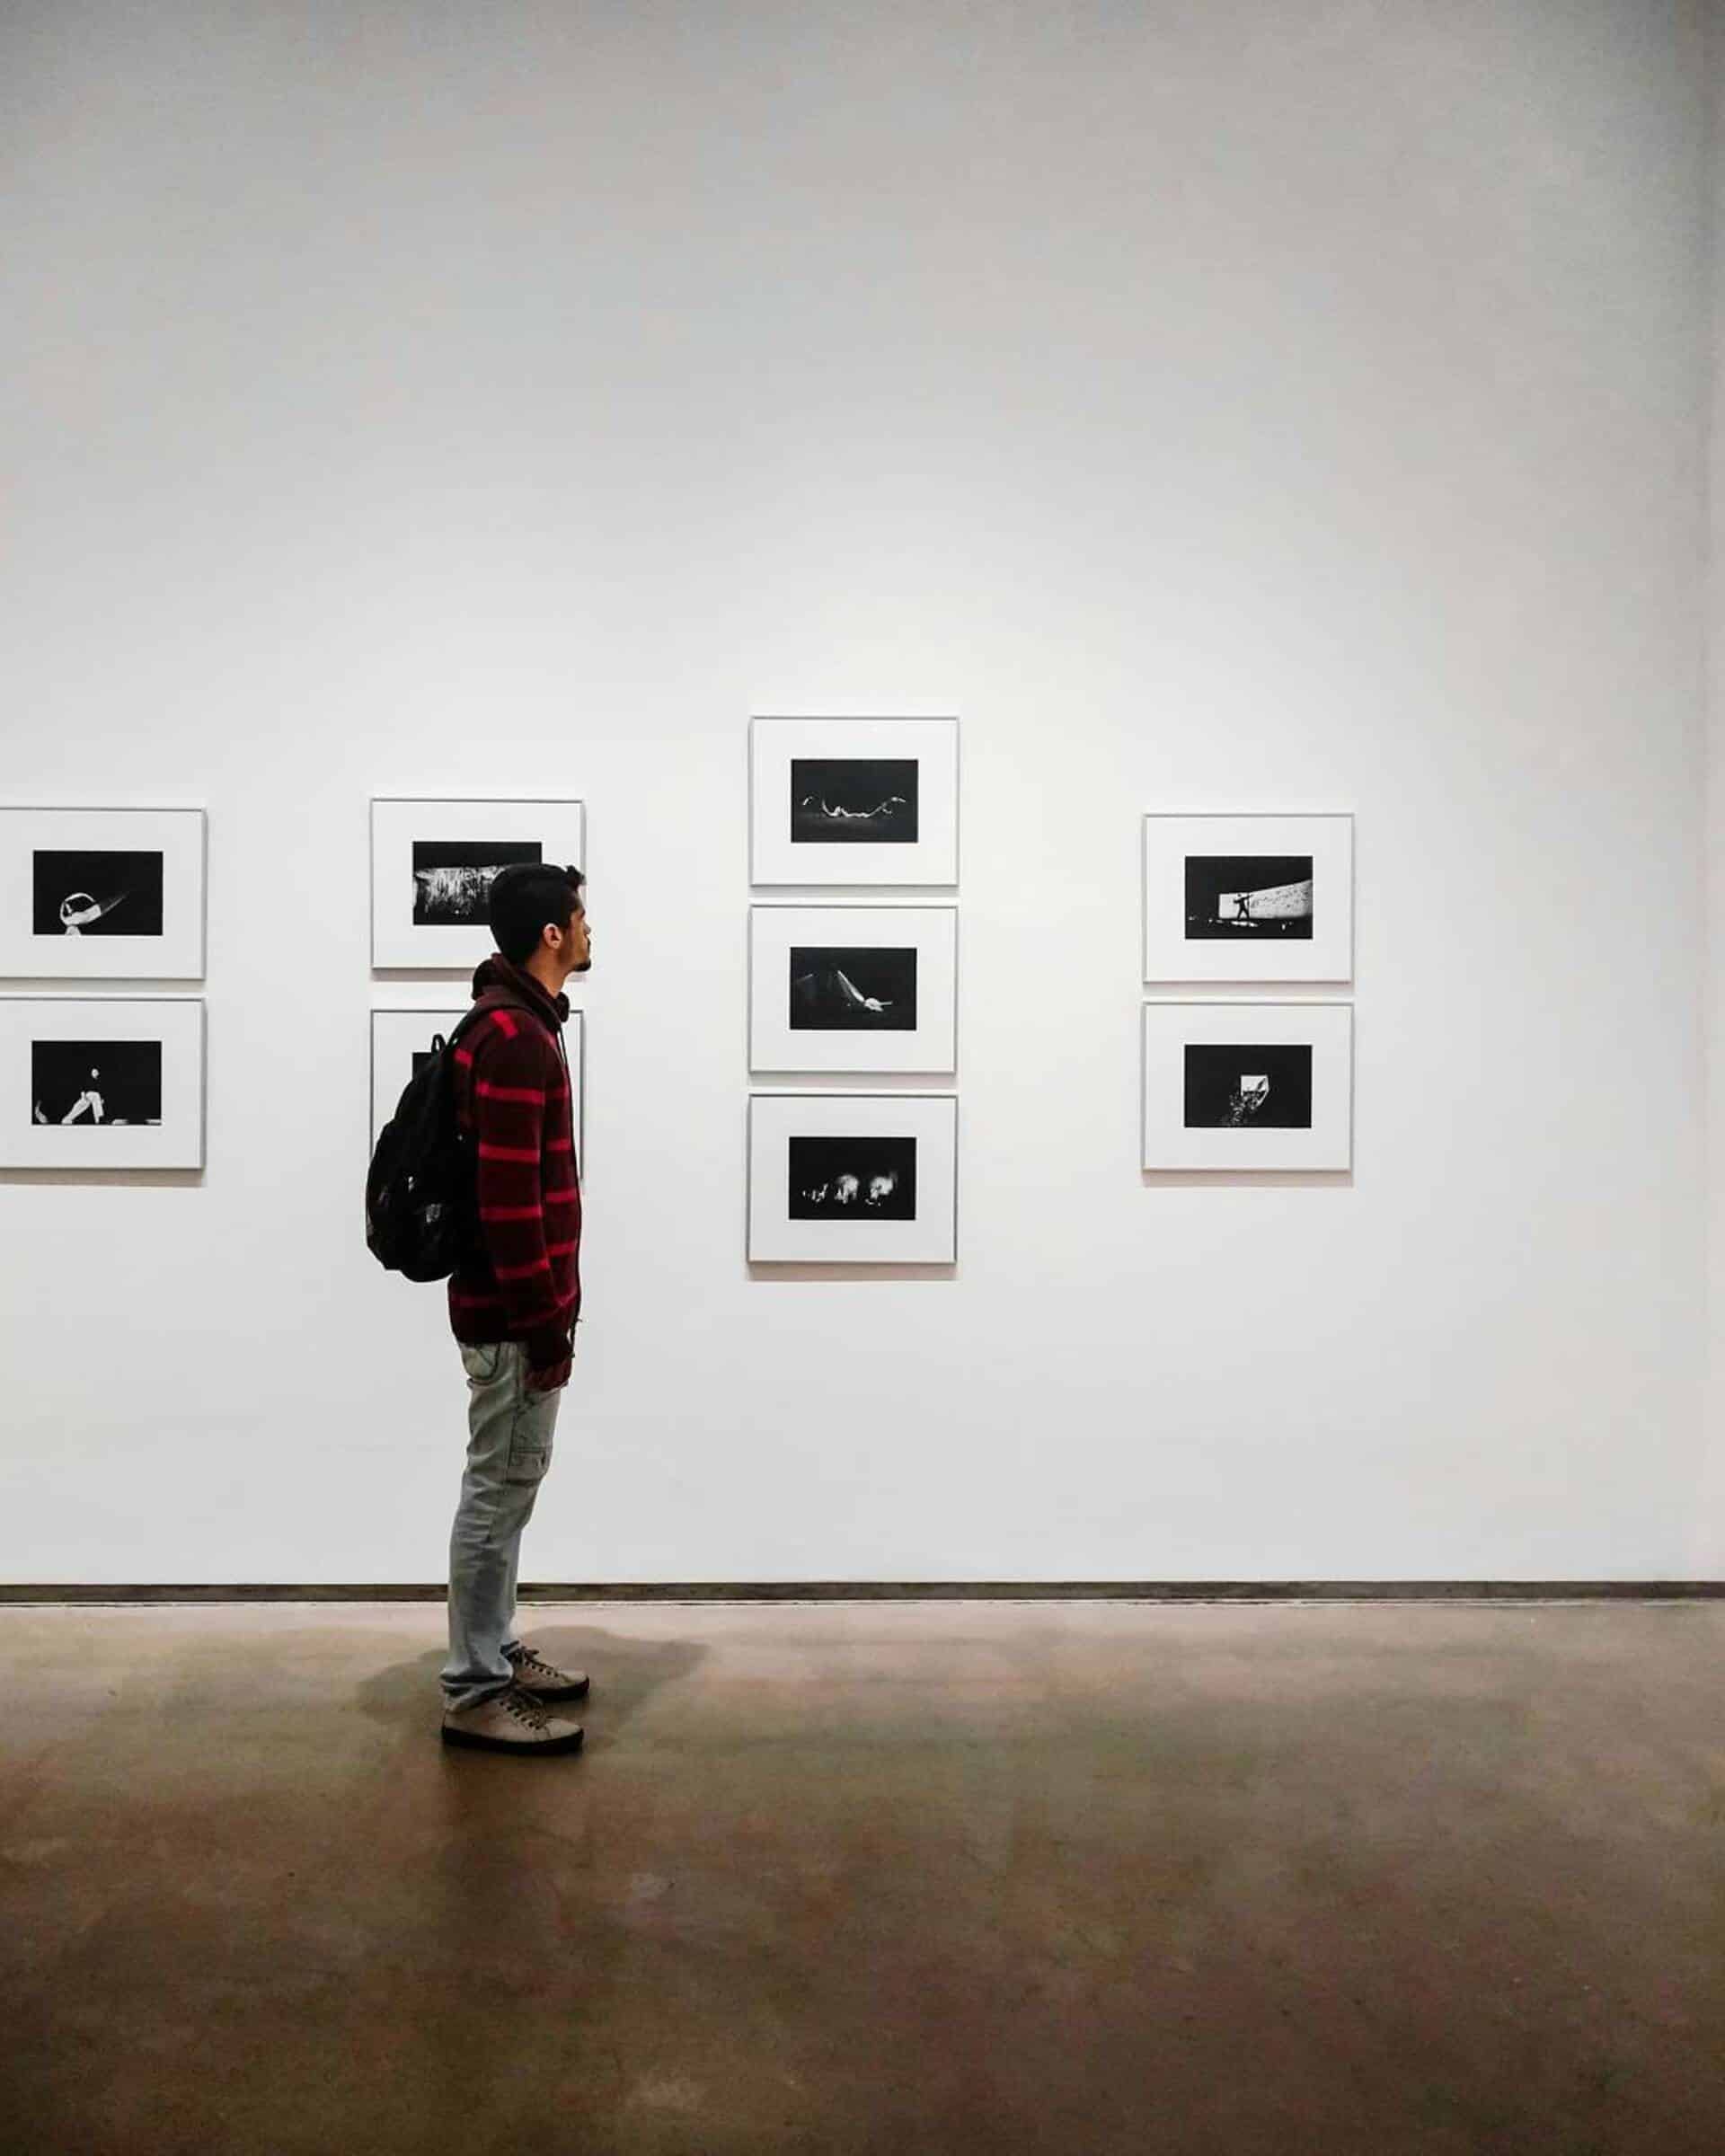 A male stood looking at are images on a white wall